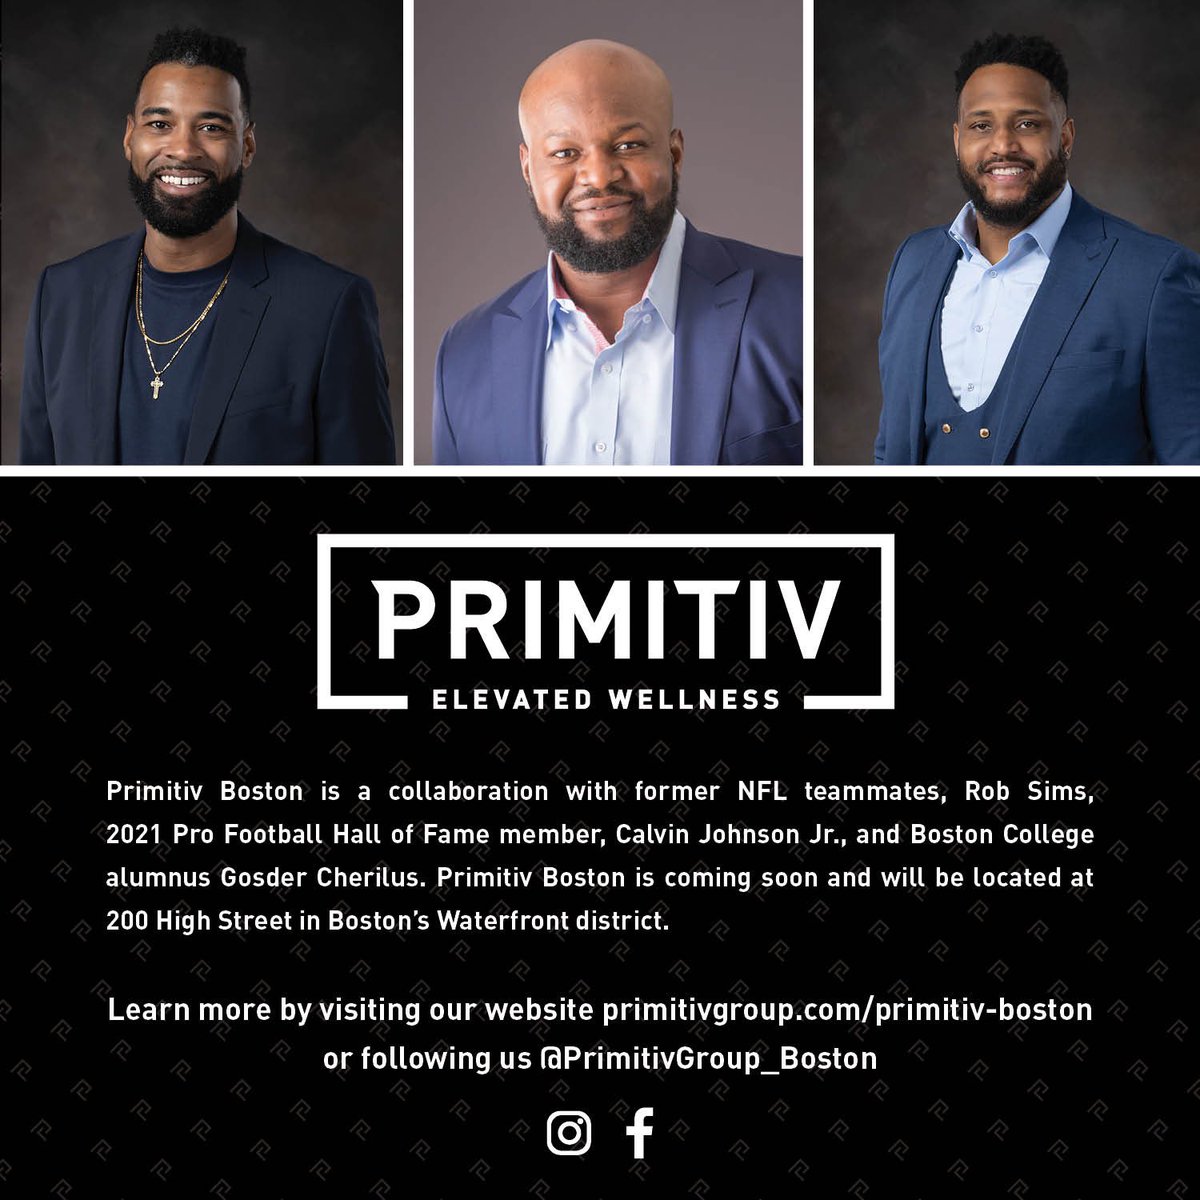 Very pleased to announce our expansion into the Massachusetts market in collaboration with former Boston College Alumn and former teammate @GosderCherilus Primitiv Group Boston coming soon and will be located at 200 High Street in Boston’s Waterfront District. @calvinjohnsonjr